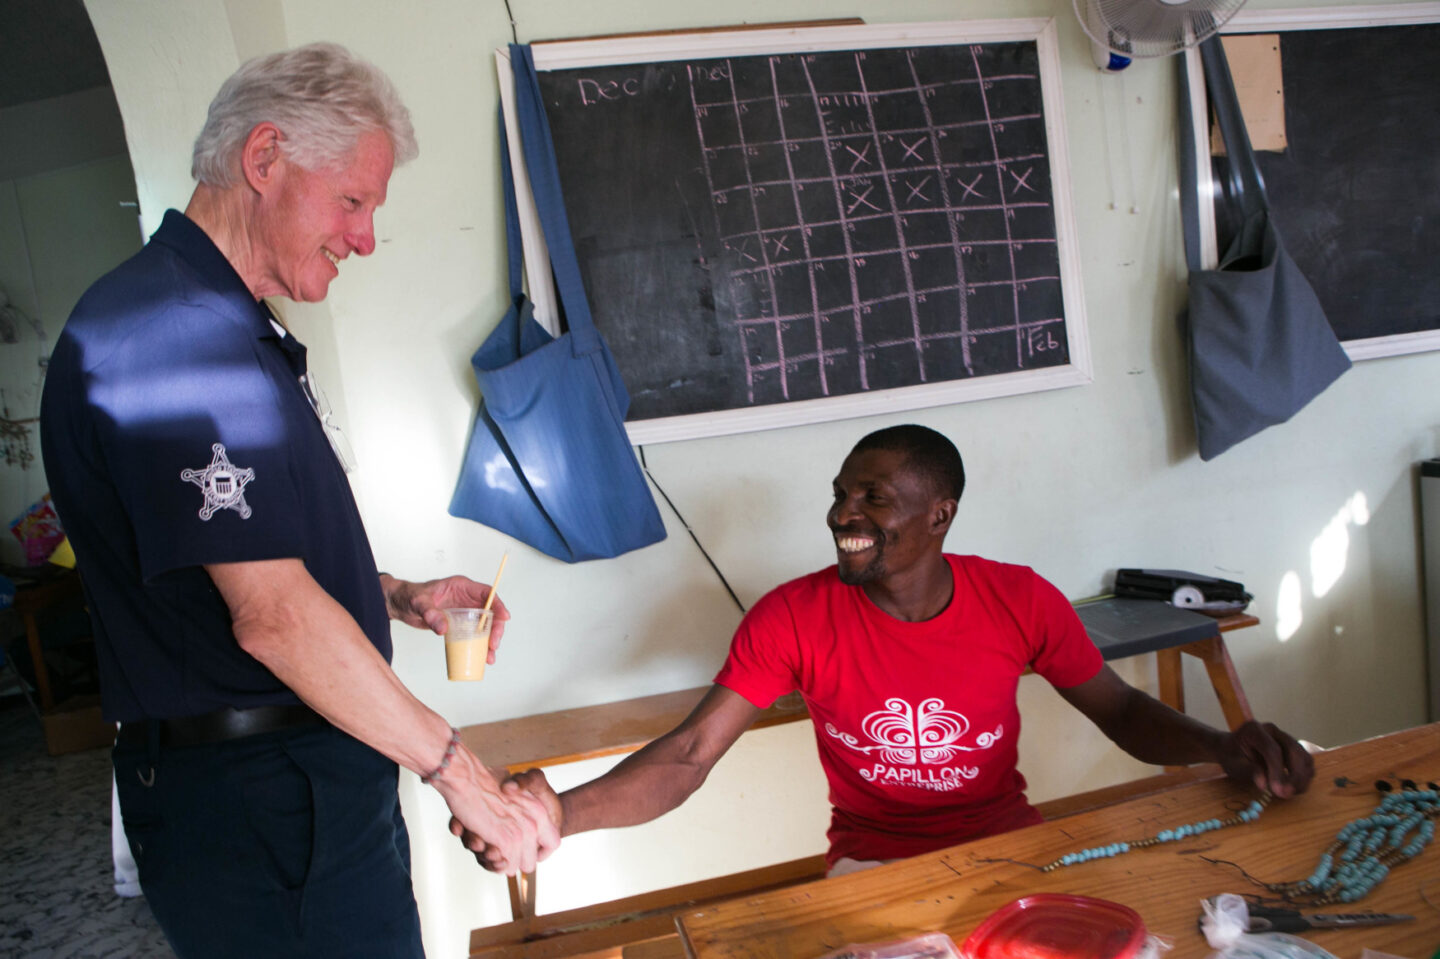 President Clinton shakes the hand of an individual putting together an artisanal piece with beads